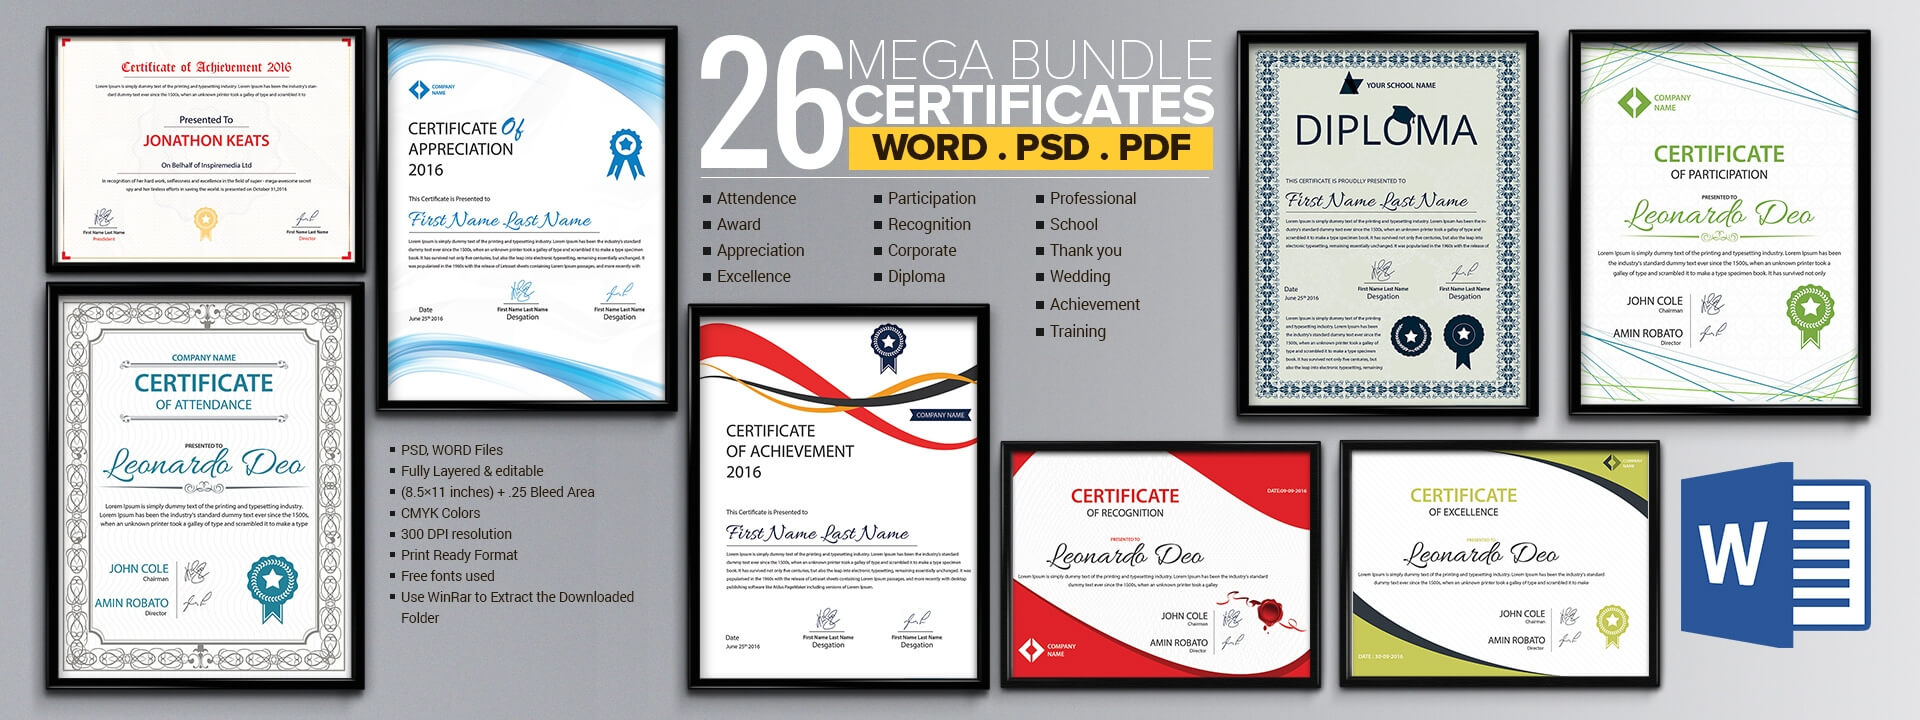 Word Certificate Template - 53+ Free Download Samples ...
 Blank Certificate Templates For Word Free